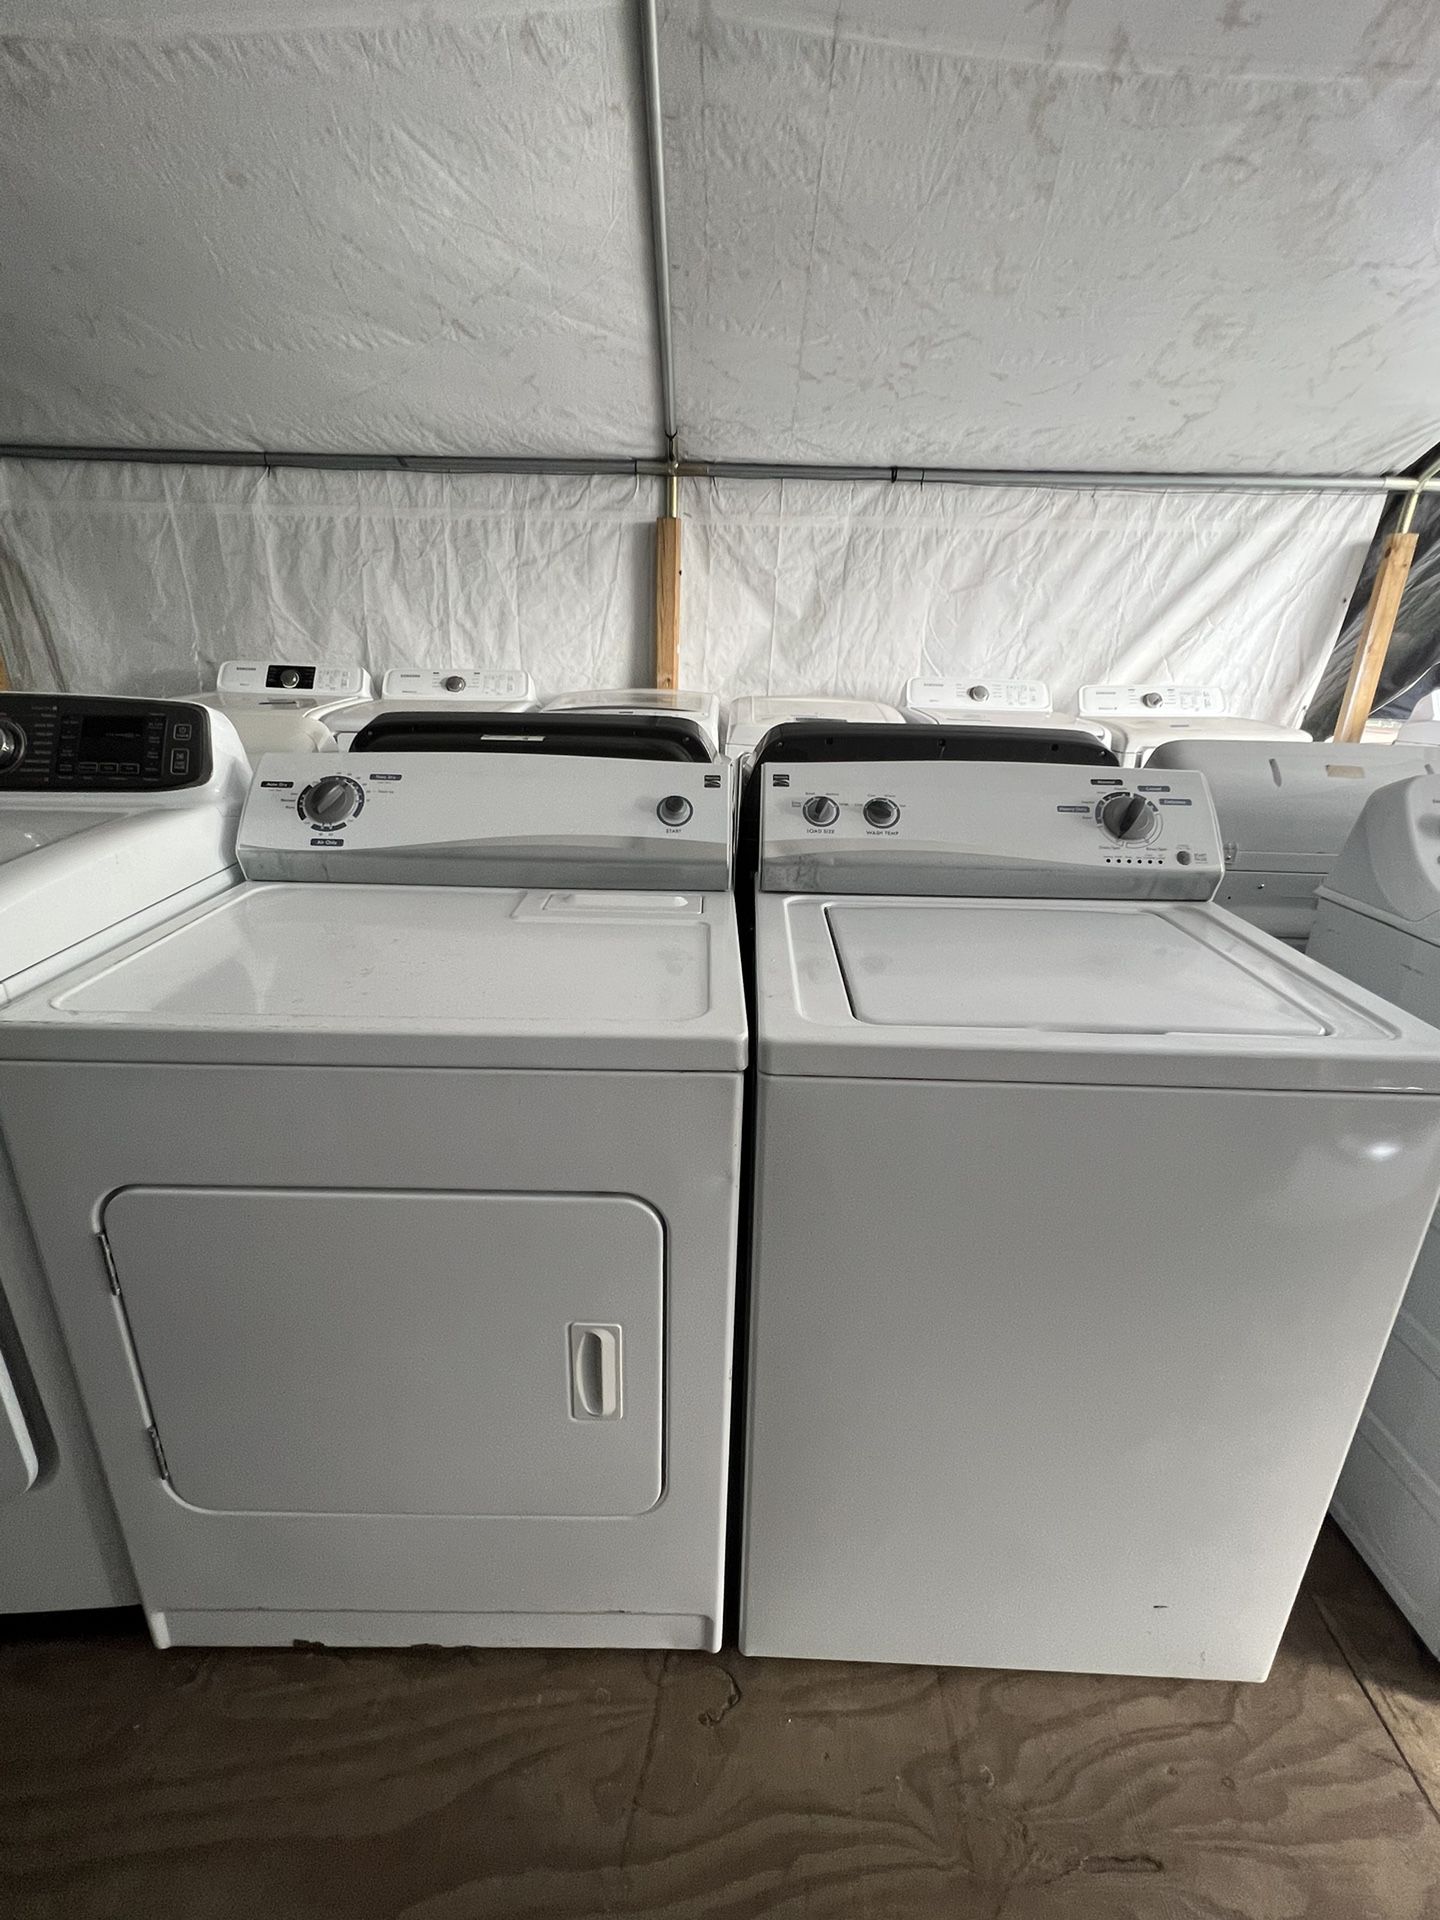 Kenmore Washer&dryer Set   60 day warranty/ Located at:📍5415 Carmack Rd Tampa Fl 33610📍